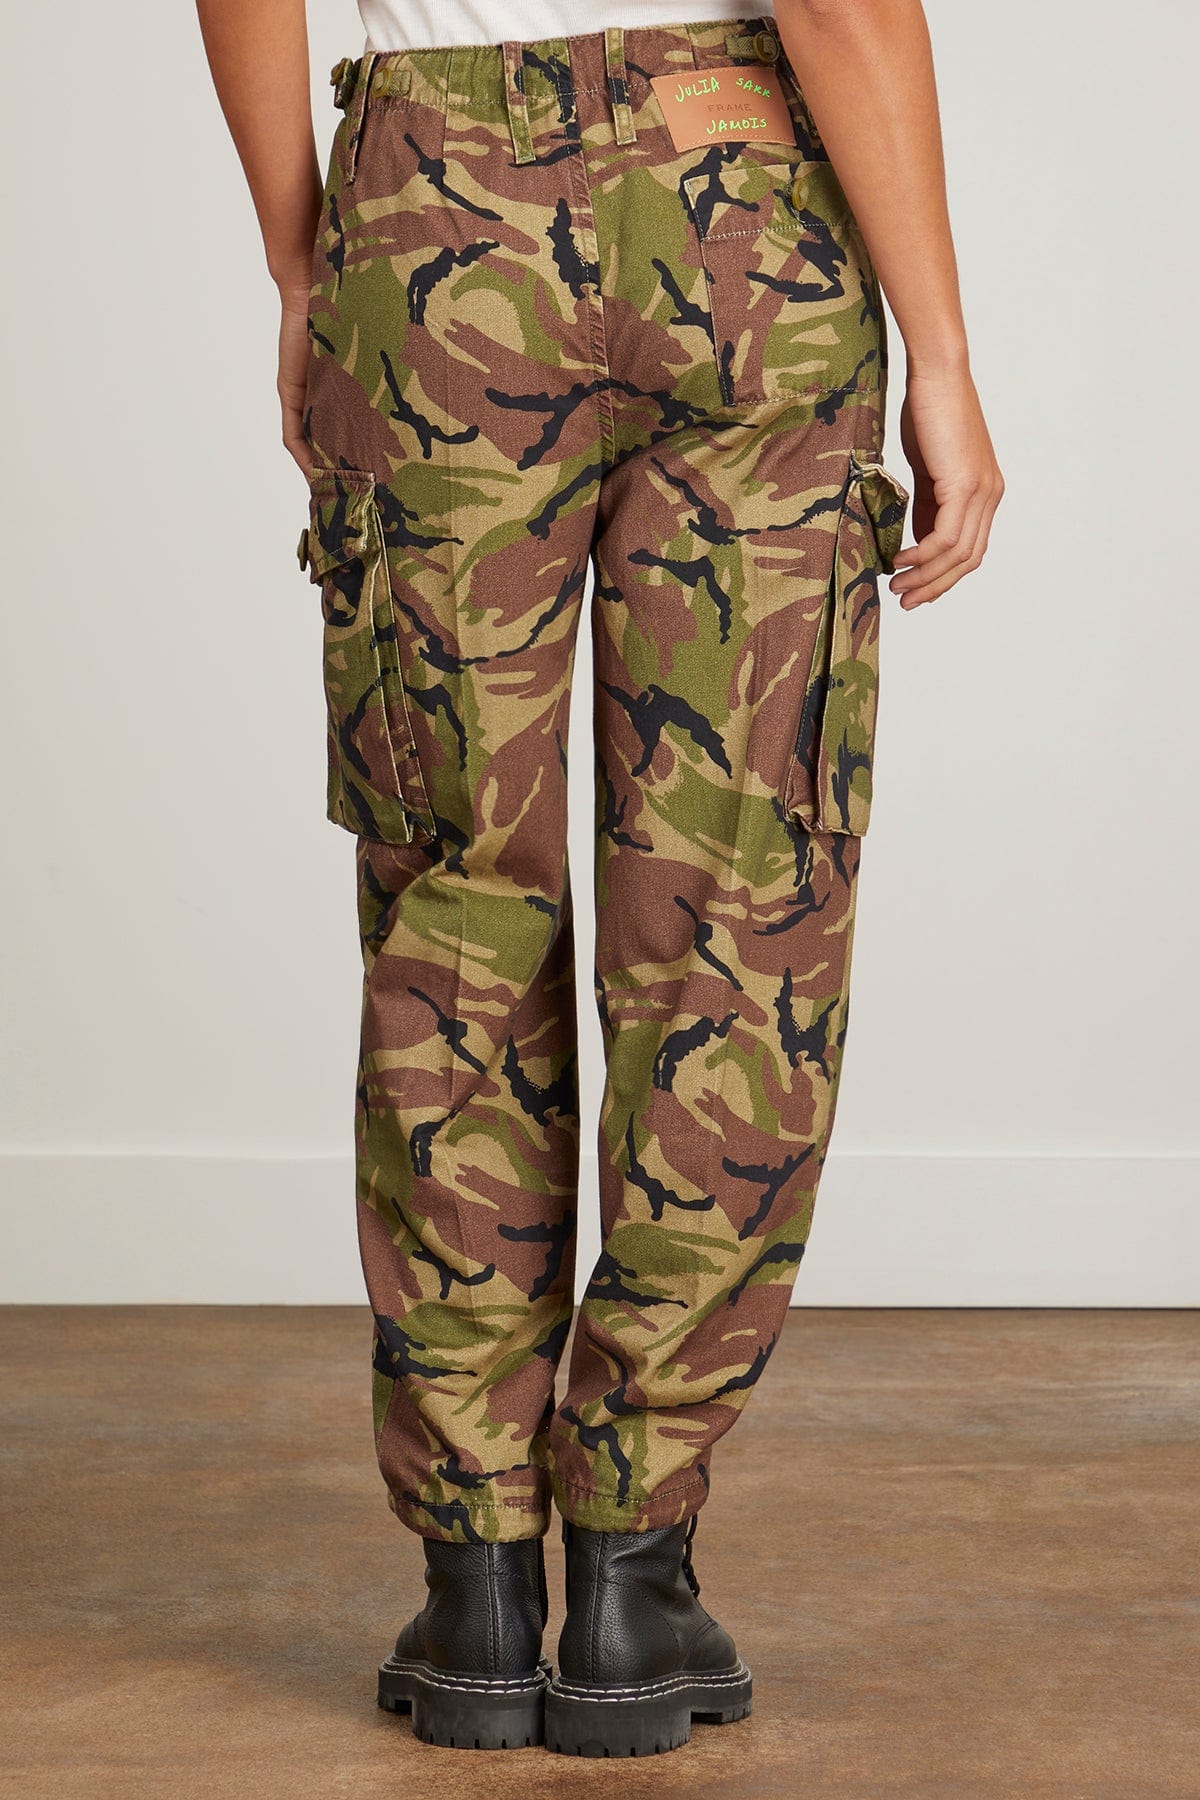 FRAME Pants High Rise Utility Trouser in Camo Frame High Rise Utility Trouser in Camo